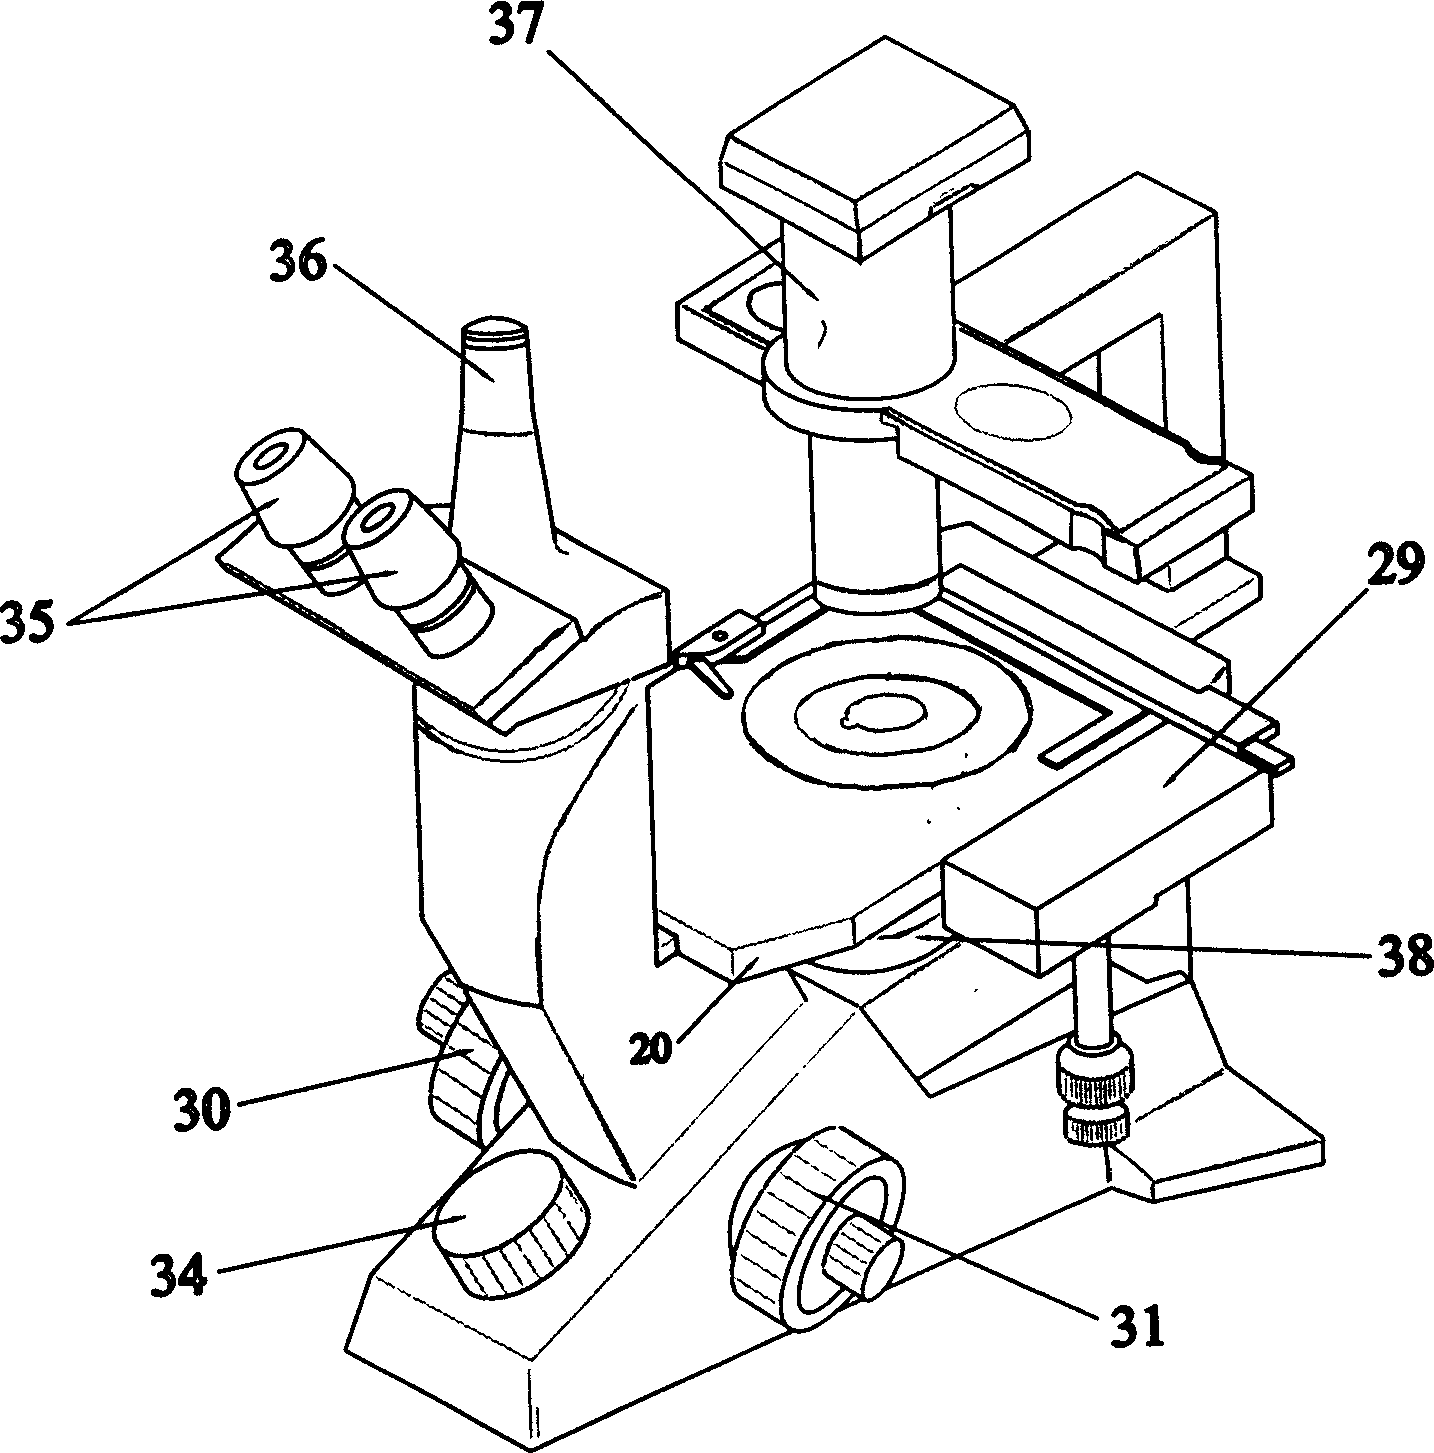 Microscope automatic operation system